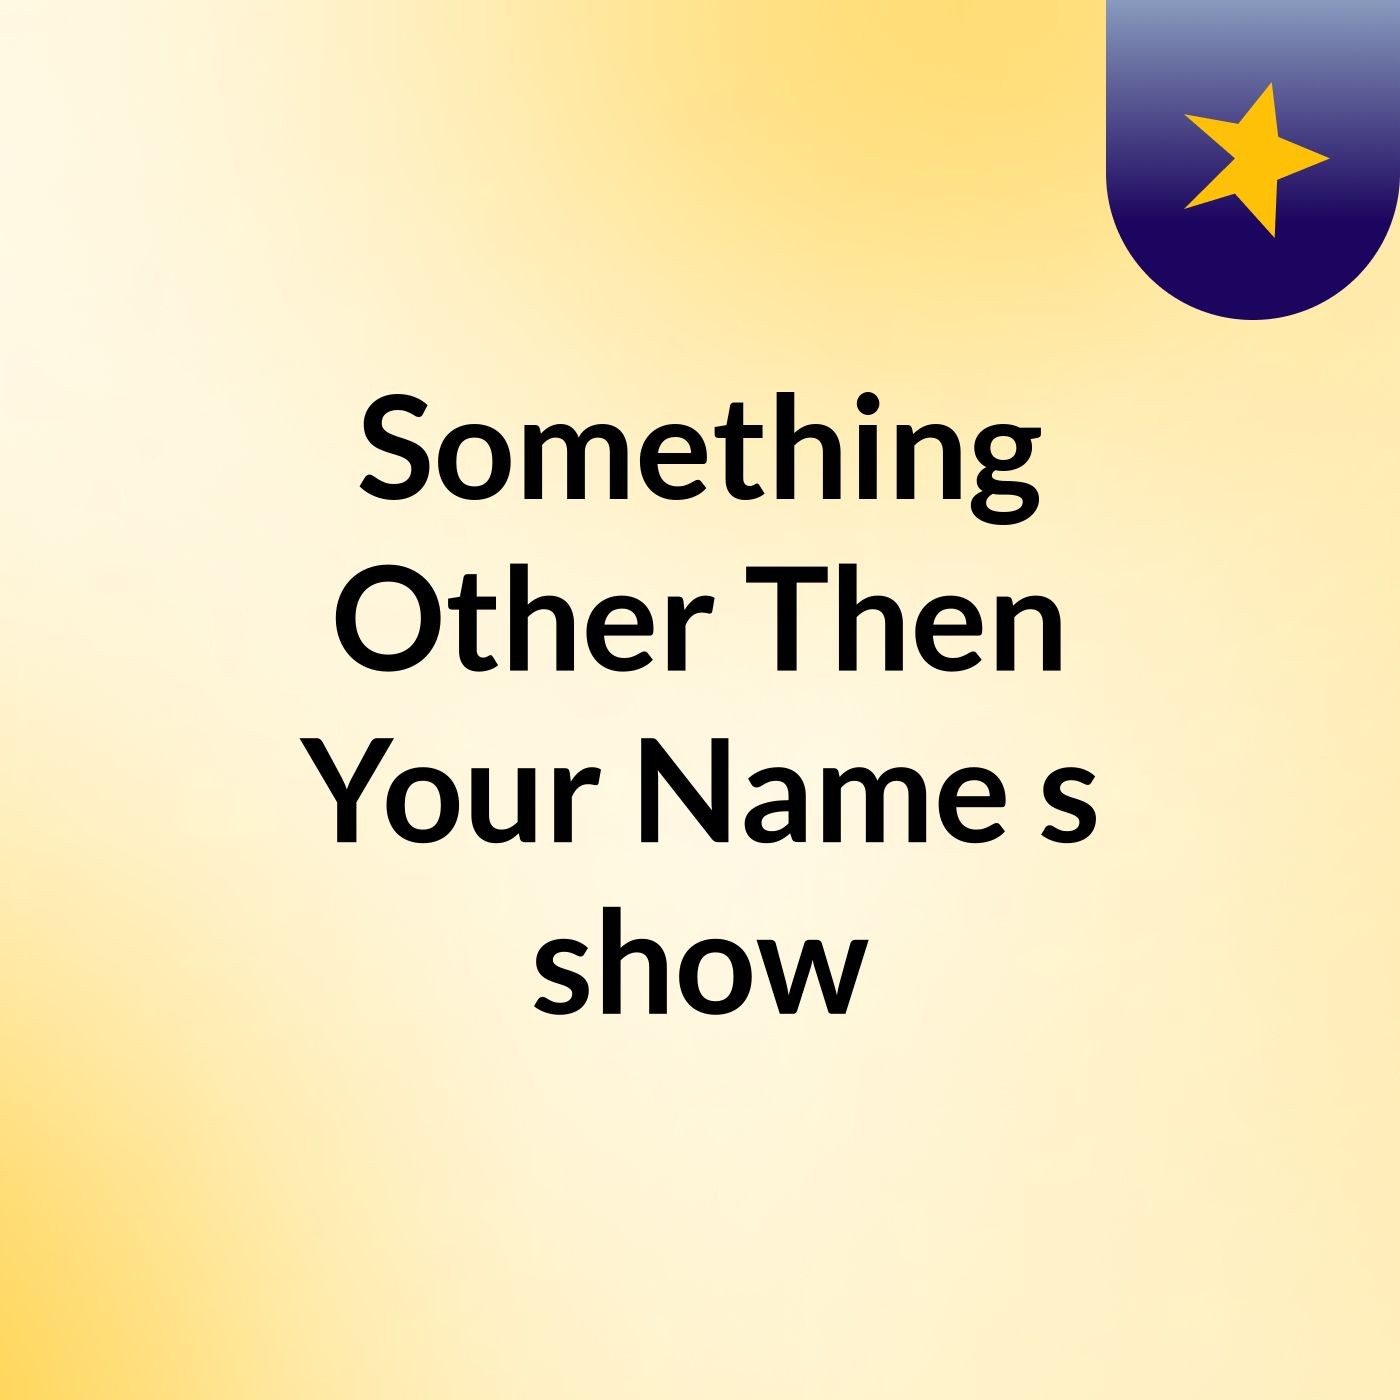 Episode 3 - Something Other Then Your Name's show